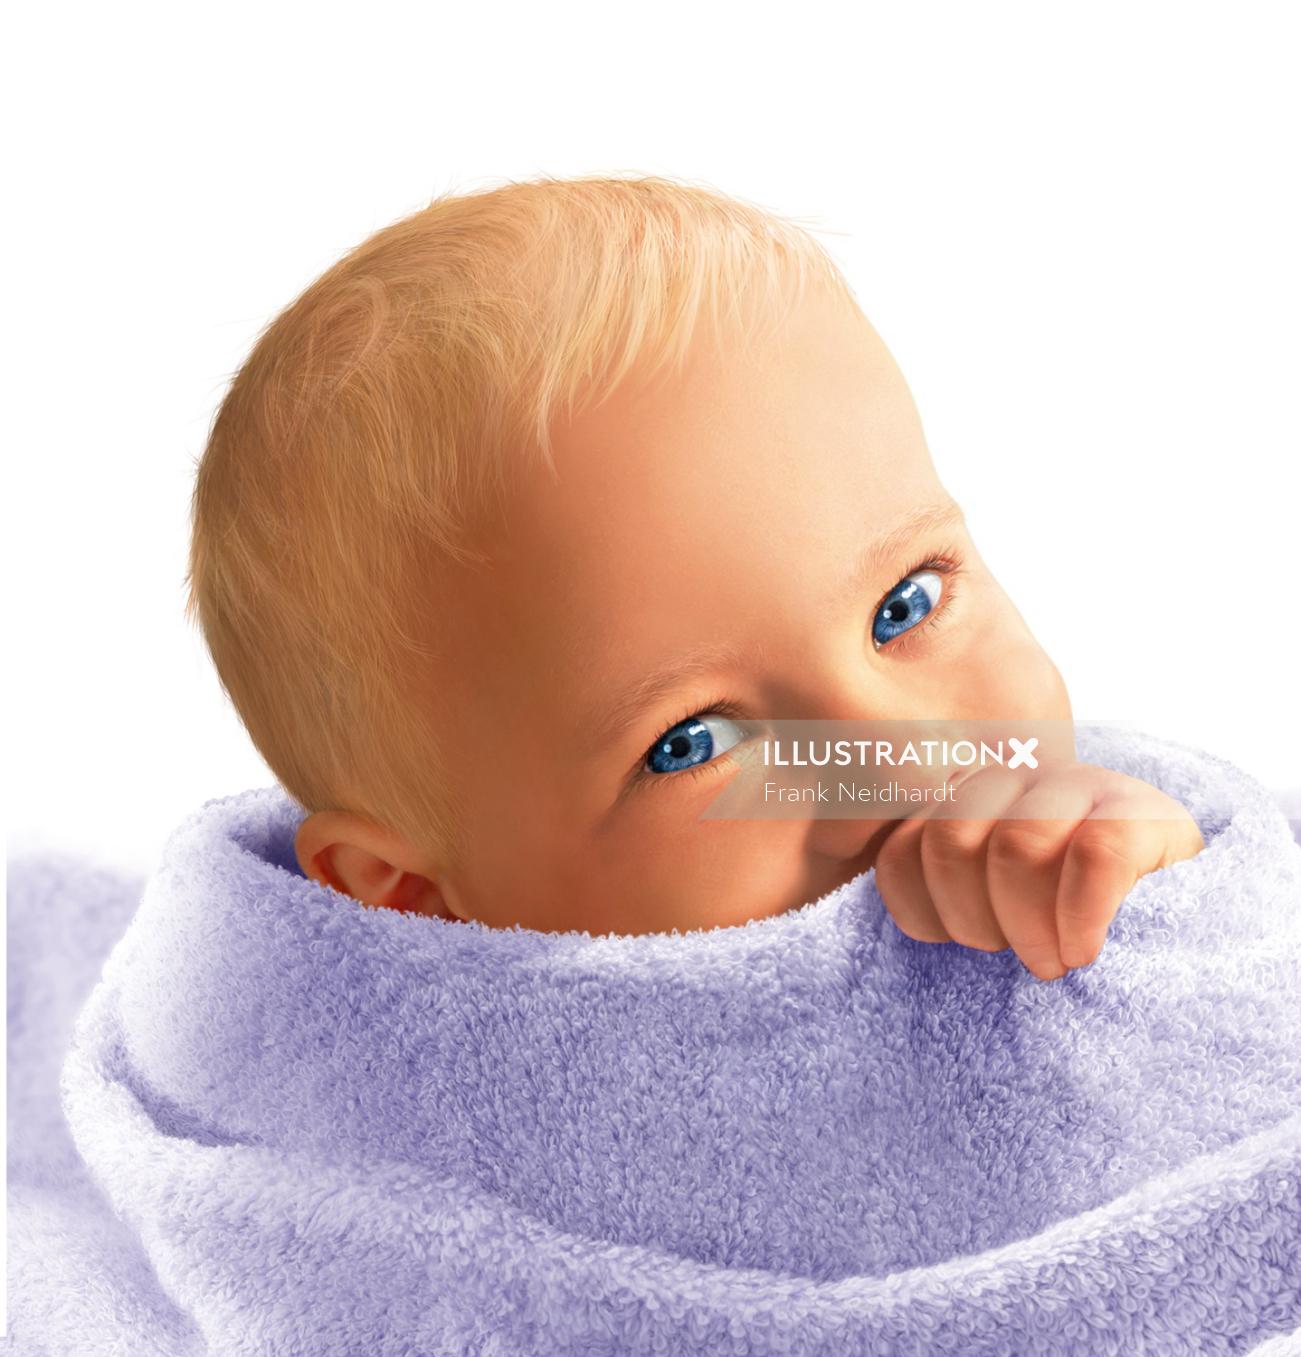 Blue eyed baby wrapped in towel
